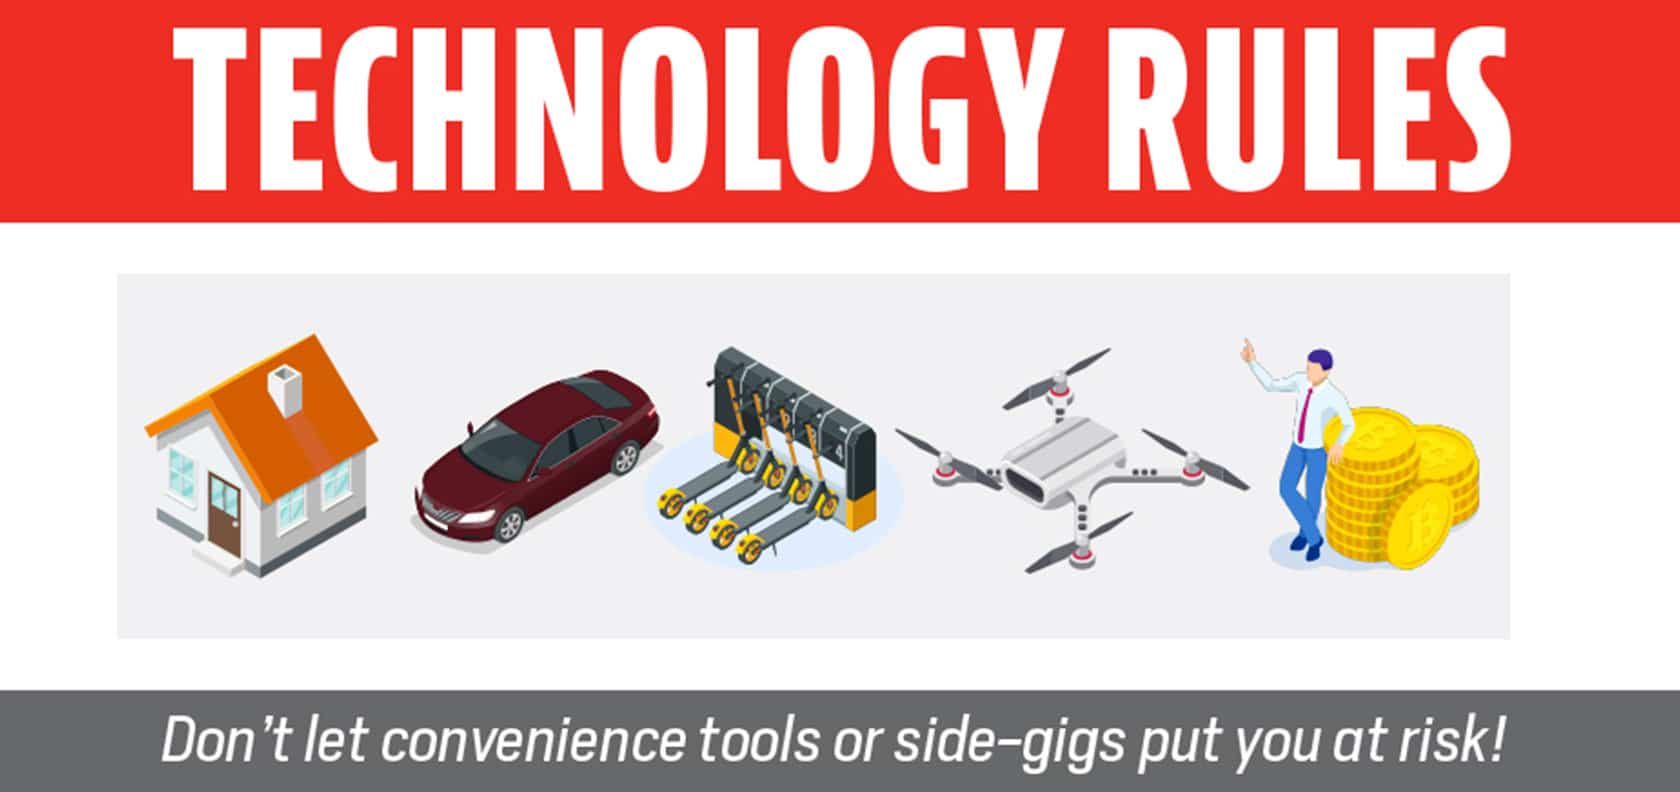 Technology rules. House, car, electric scooters, drone, money.